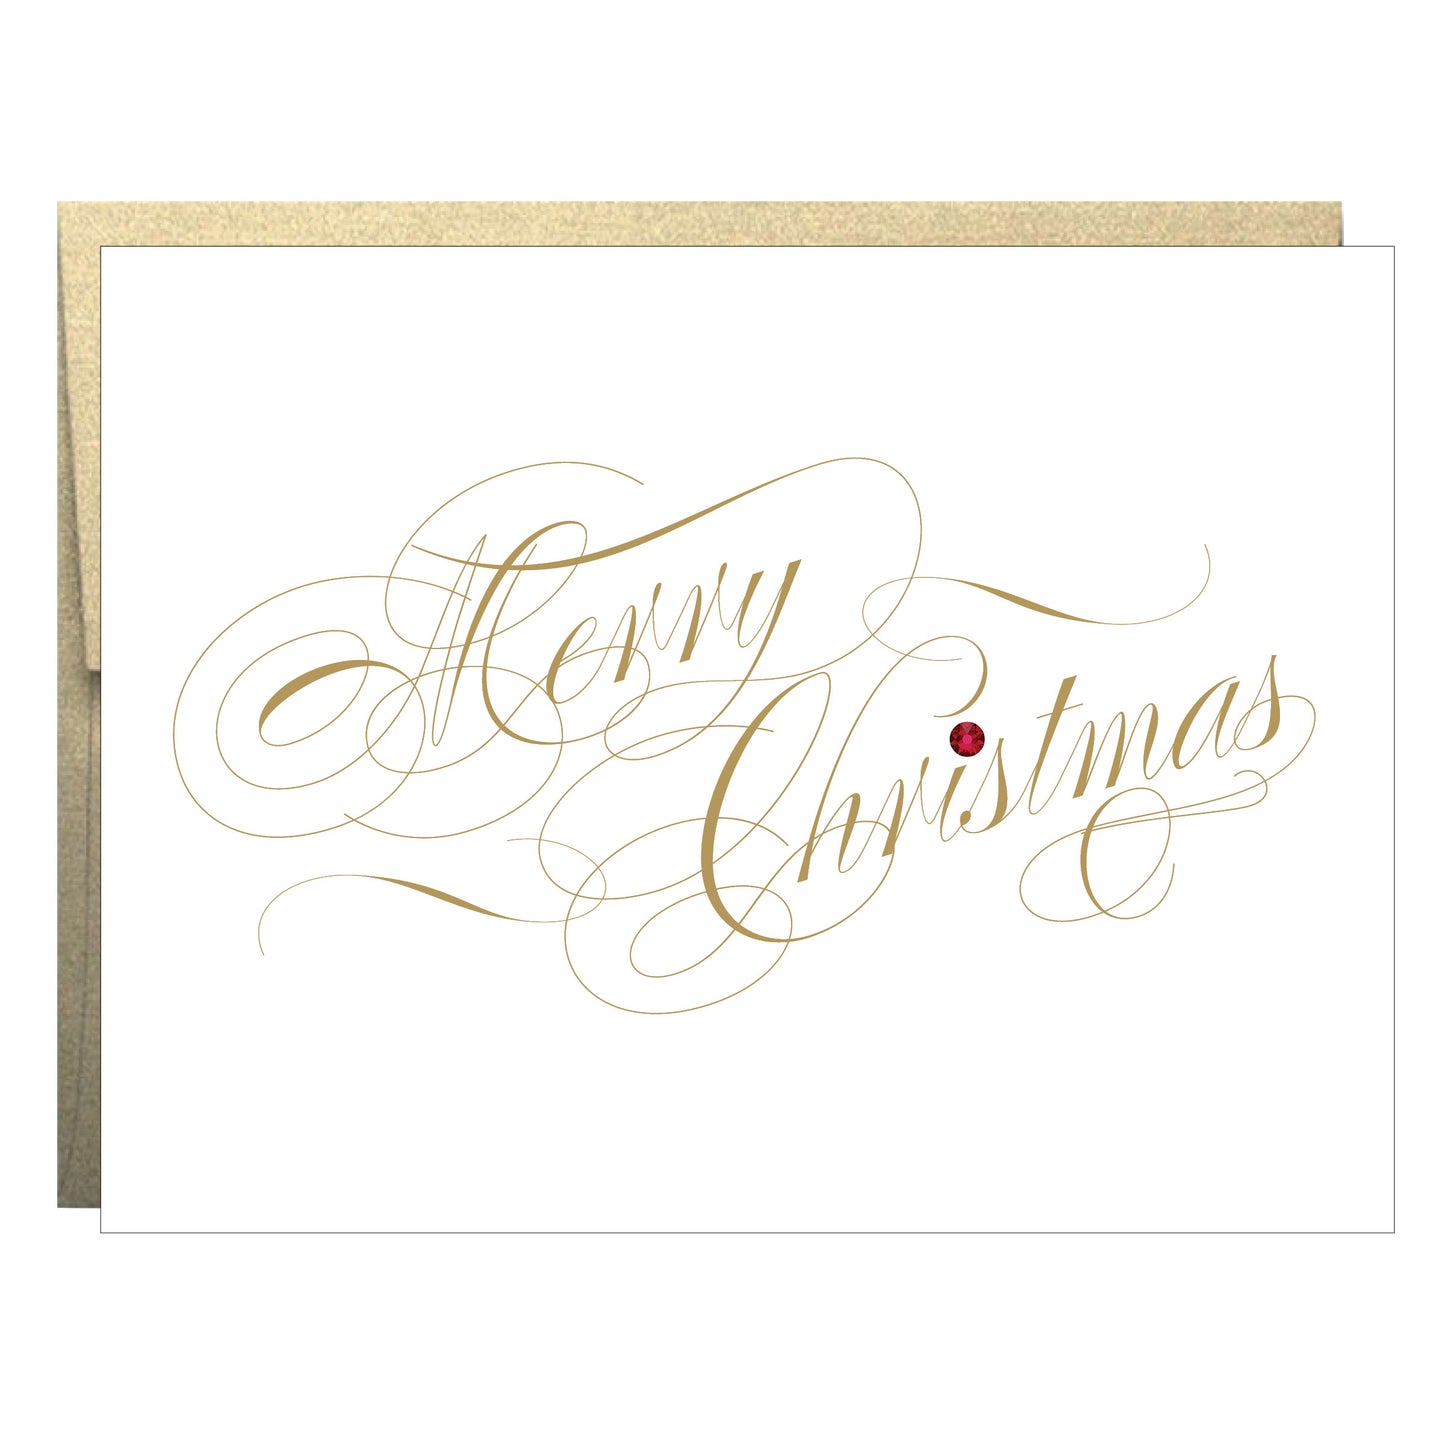 Letterpress Christmas Card with Rhinestone and Metallic Gold Envelope - 5 pack